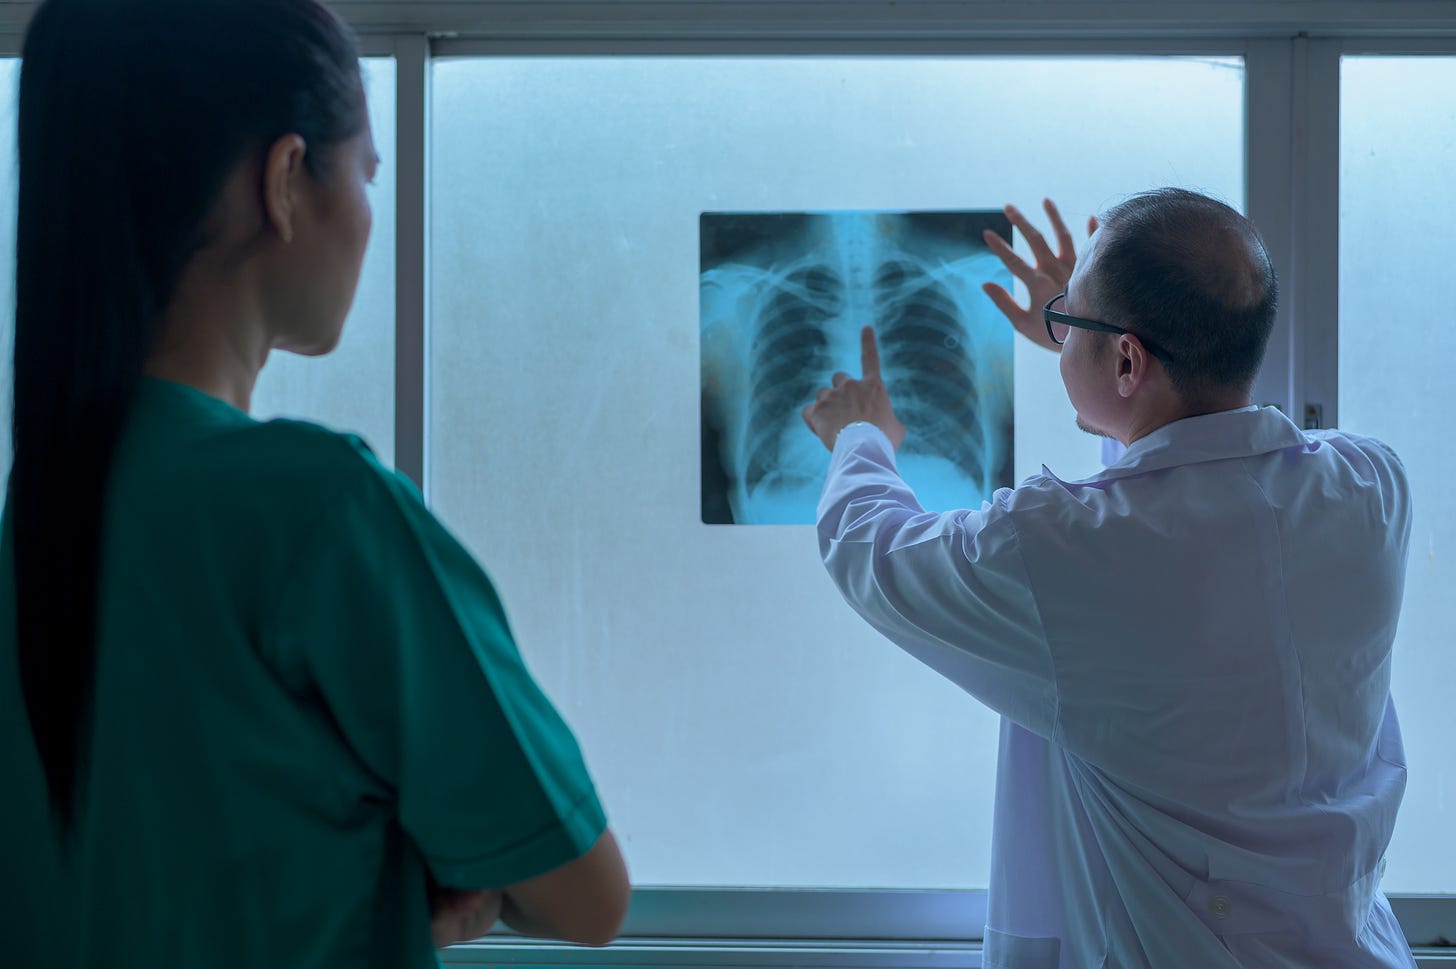 A doctor shows a patient a chest x-ray and points approximately to where the heart is located.